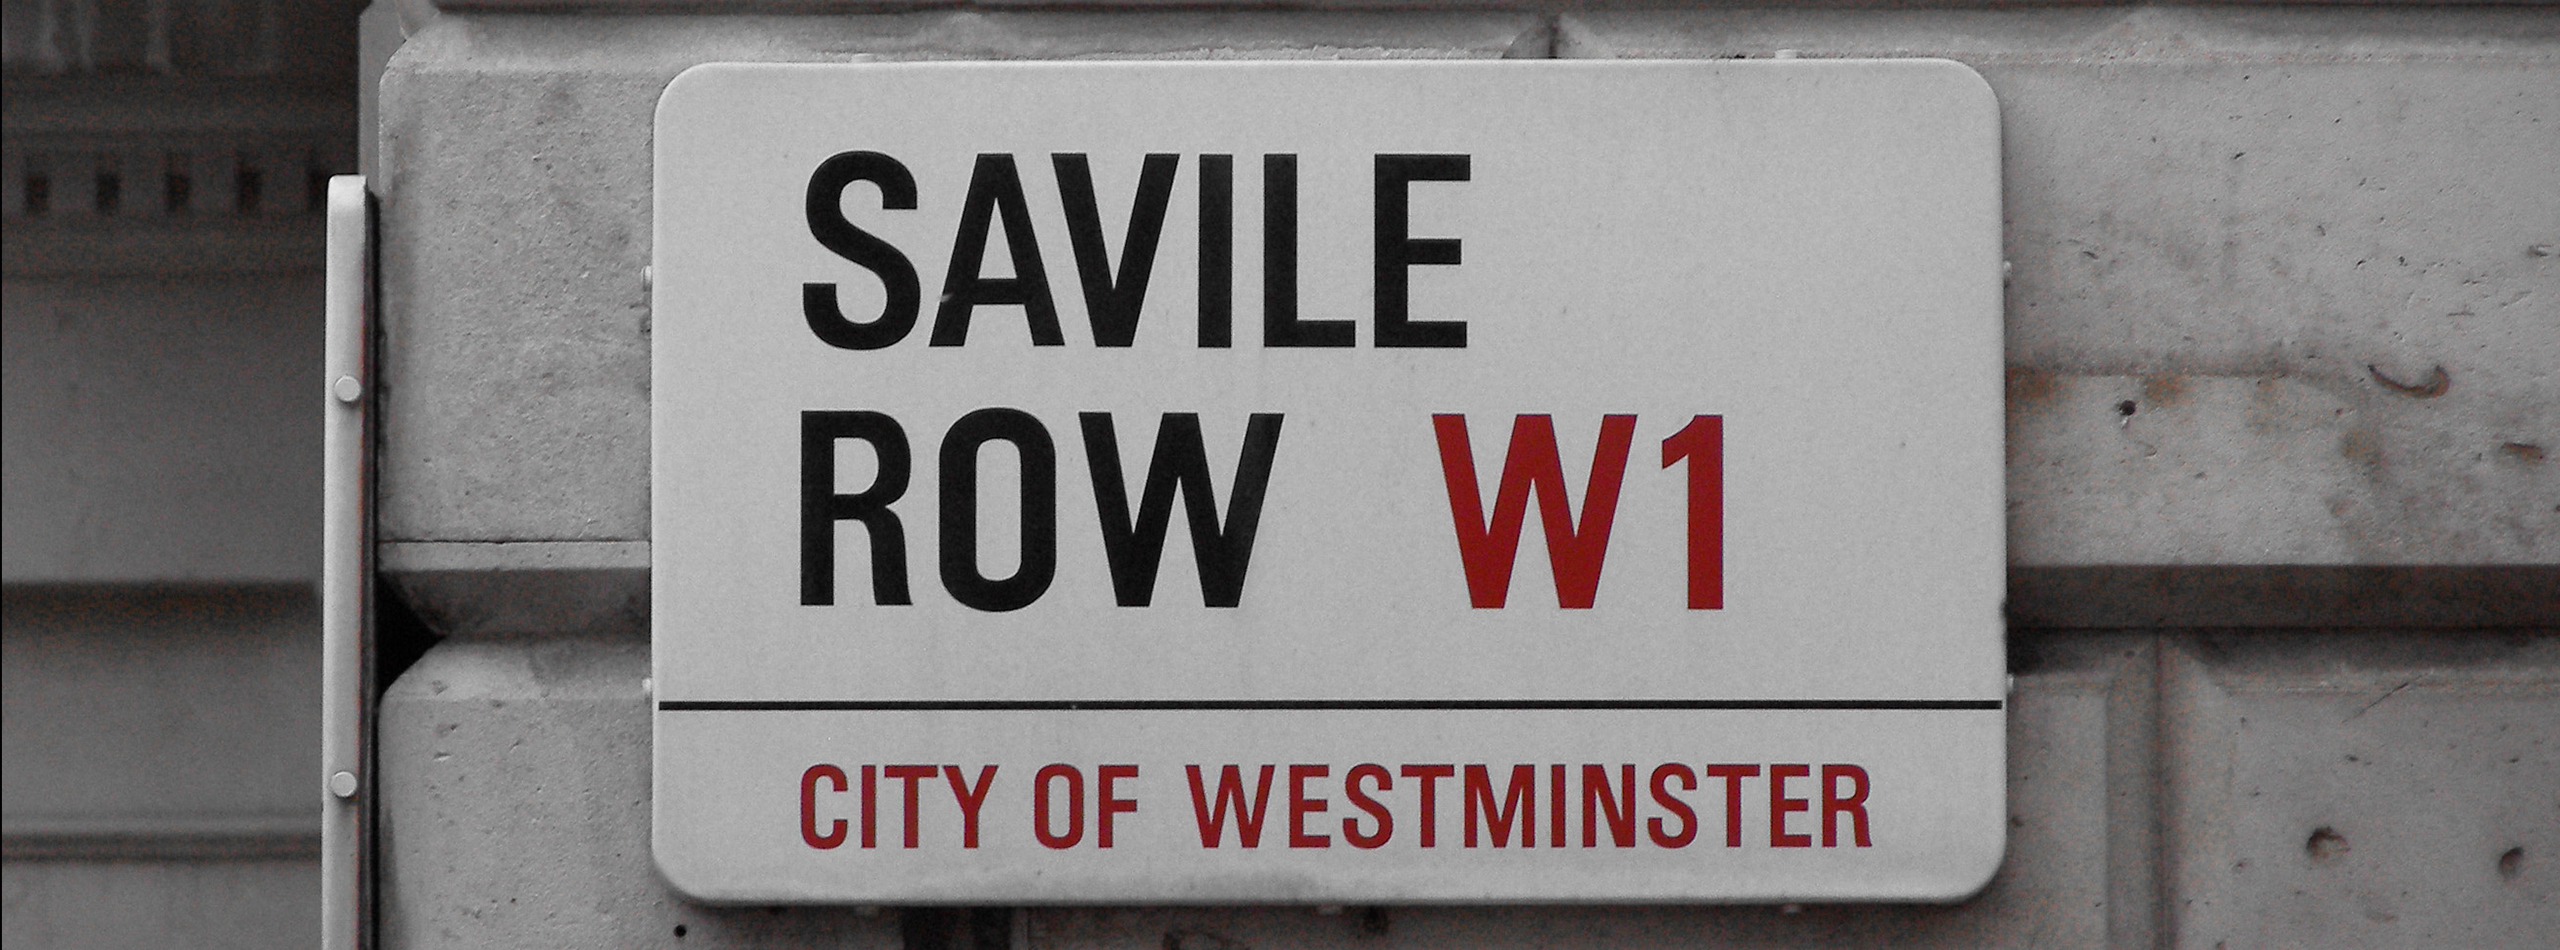 Andrew Black Savile Row Contact Page